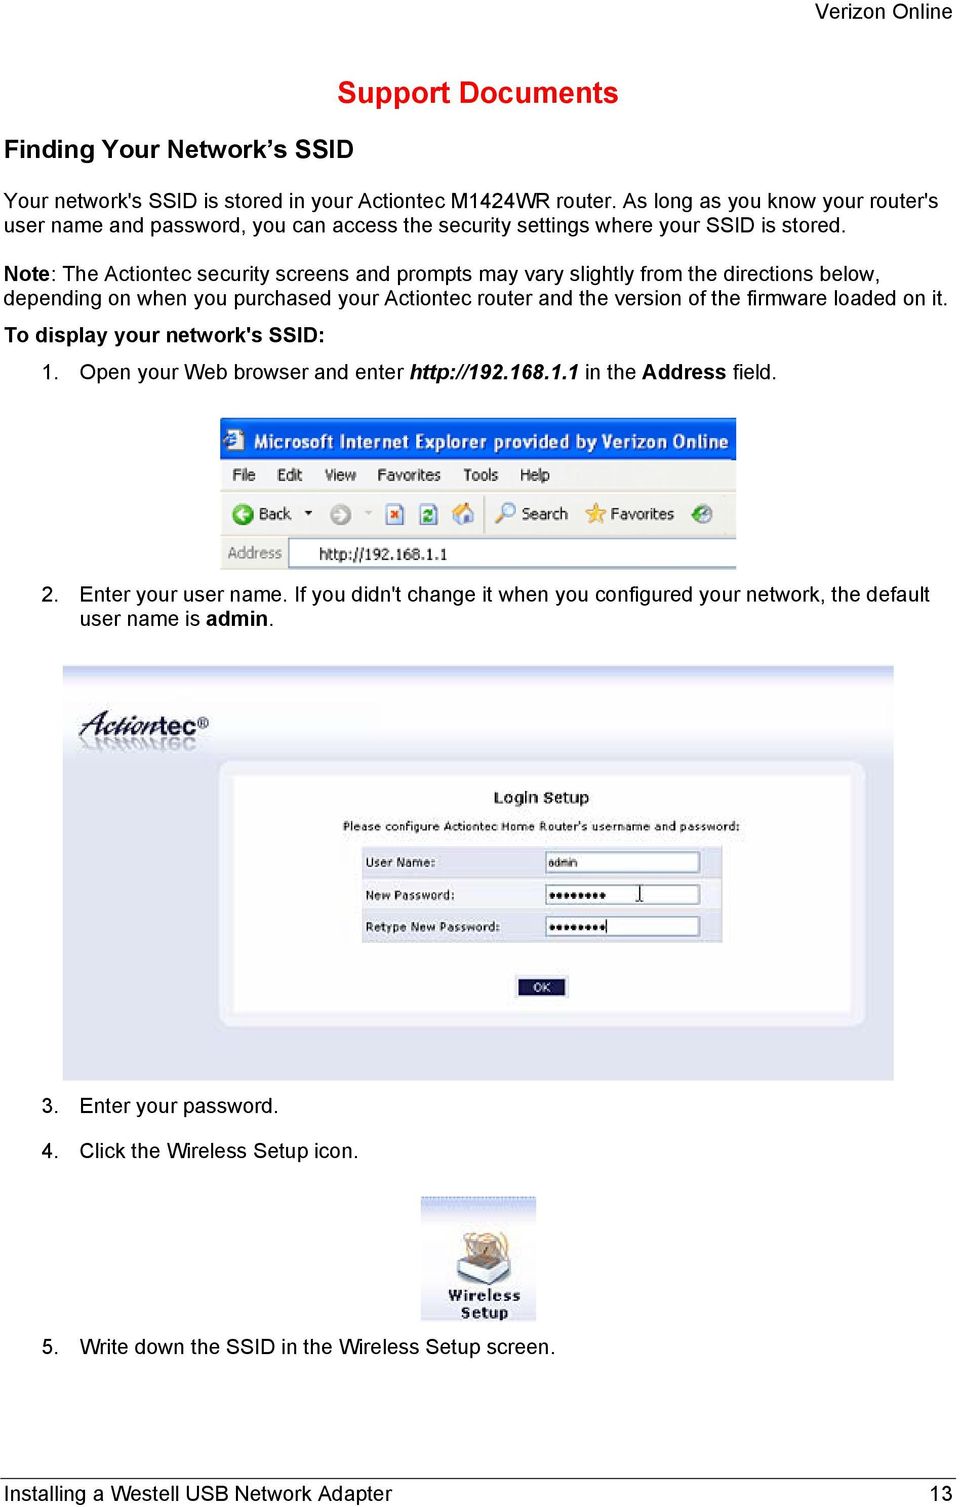 Note: The Actiontec security screens and prompts may vary slightly from the directions below, depending on when you purchased your Actiontec router and the version of the firmware loaded on it.